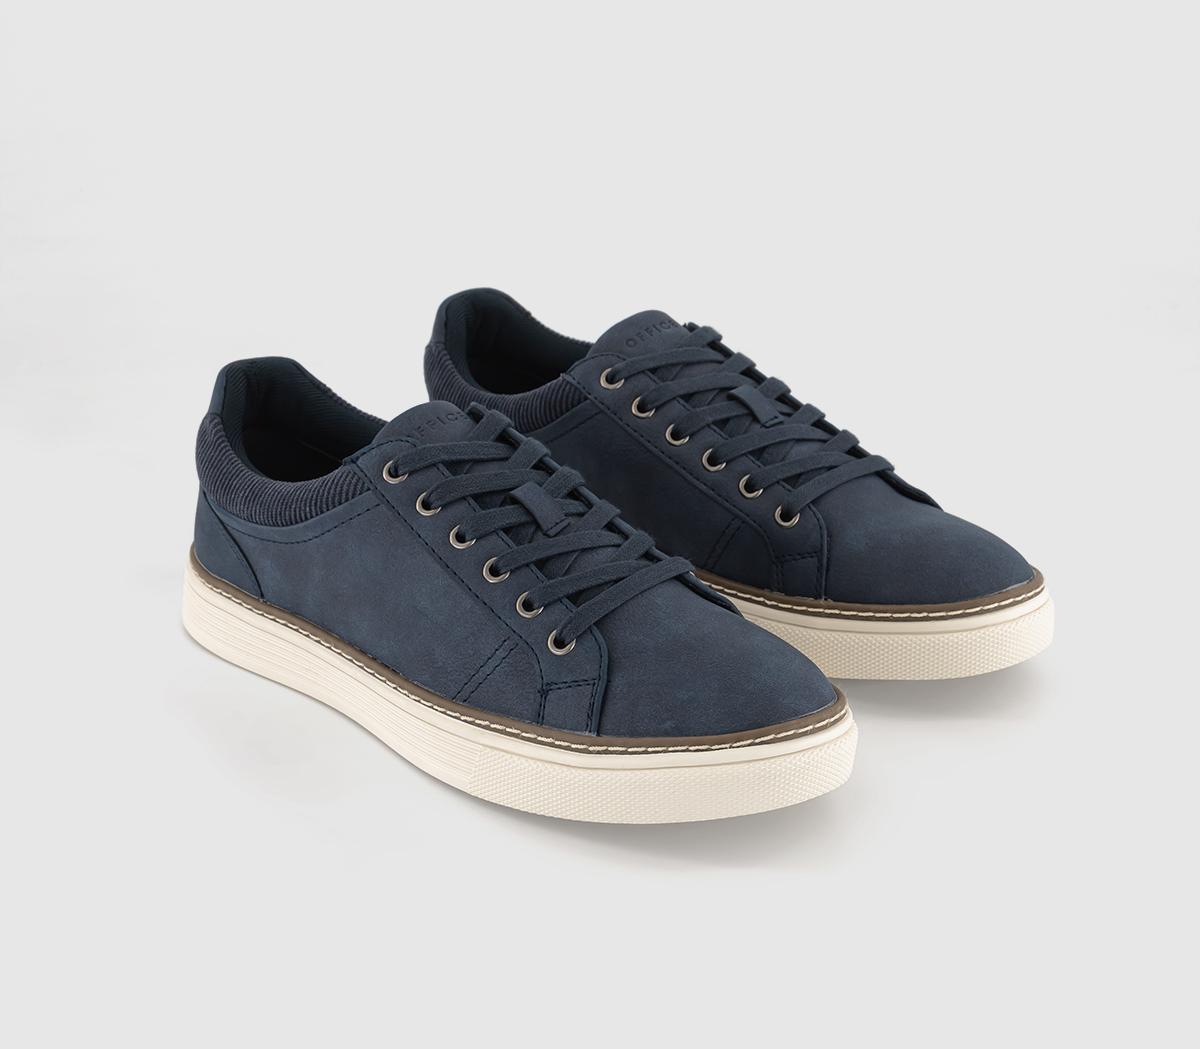 OFFICE Mens Chatsworth Cord Collar Trainers Navy Blue, 10